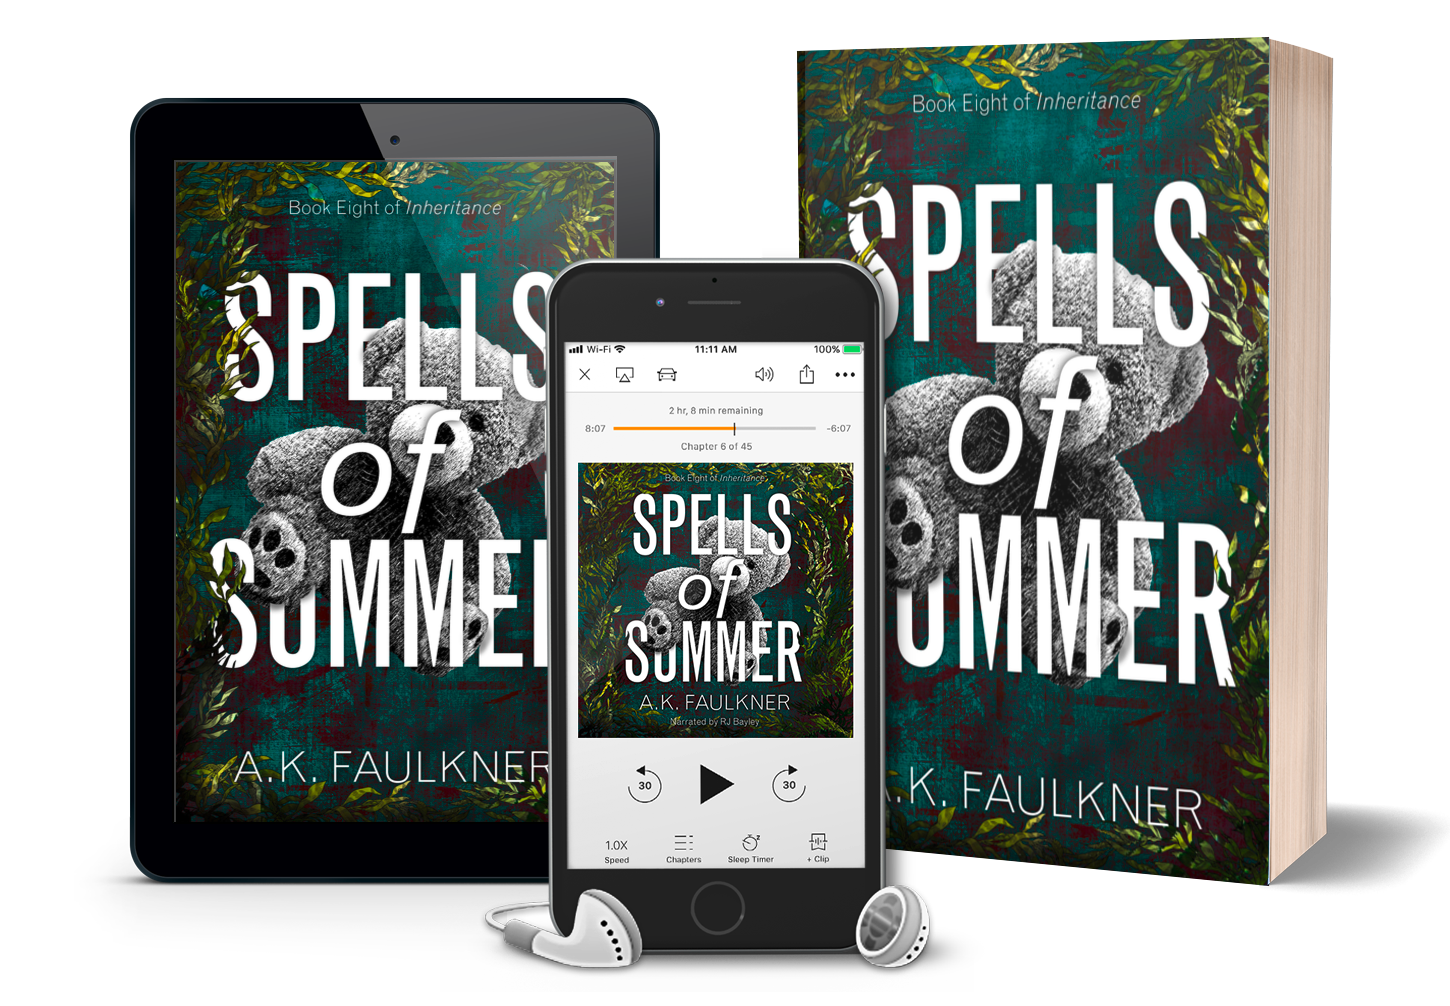 Spells of Summer as an ebook, audiobook, and paperback